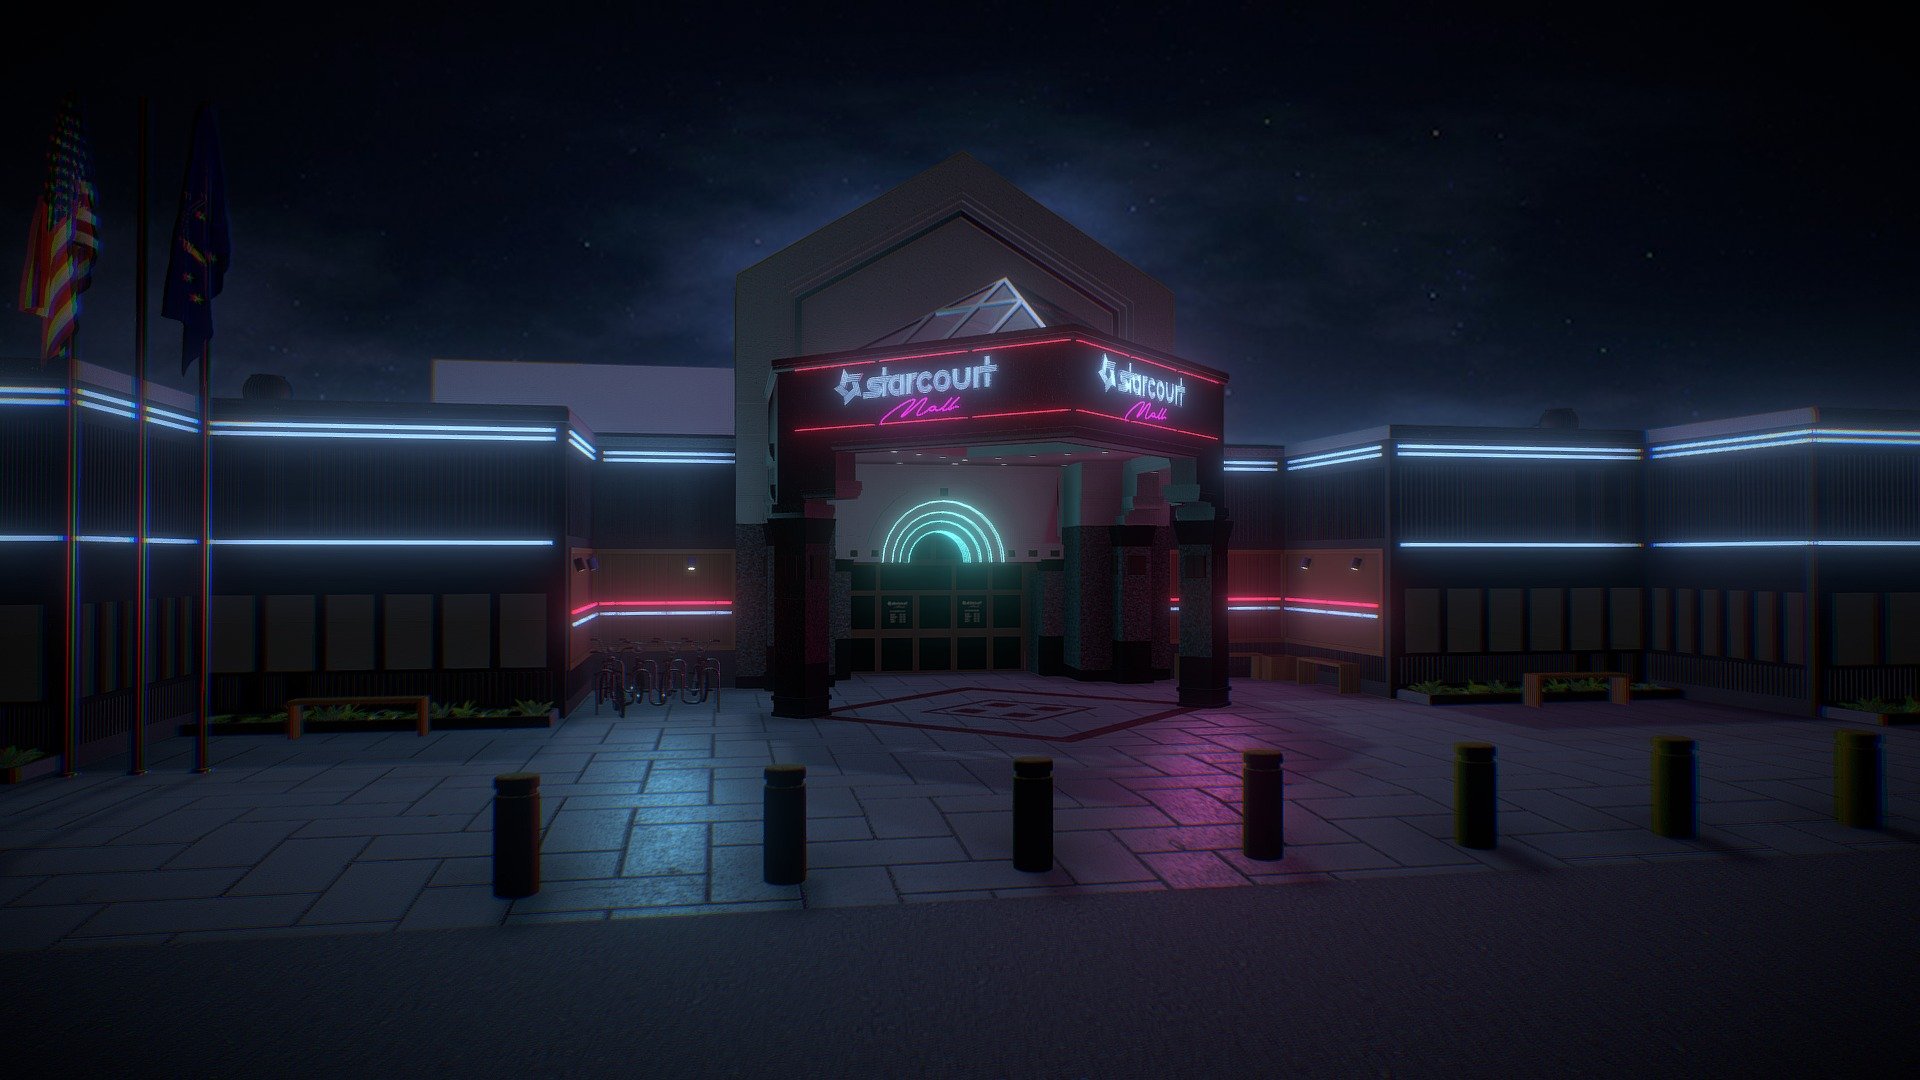 My model of Starcourt Mall from Stranger Things. This was modelled in 3DS Max using photos of the actual mall and splines for the neon lights. As soon as I saw the trailer for Season 3, I knew I had to build this. Check out my other Stranger Things models in my collections here ;) 

Daytime version: https://sketchfab.com/3d-models/starcourt-mall-stranger-things-daytime-25bbfd839fb545a8a8c4018e395d9804?share=da694d73daf5c60bc5c7129f1b065e11dc5baa7af7ce3f540a4dfd2813971f2c

This model is not downloadable anymore, due to people selling my work without permission. Any abusive comments will be reported&hellip;You have been warned! 

Thanks for looking :) - Starcourt Mall (Stranger Things) - 3D model by paulelderdesign 3d model